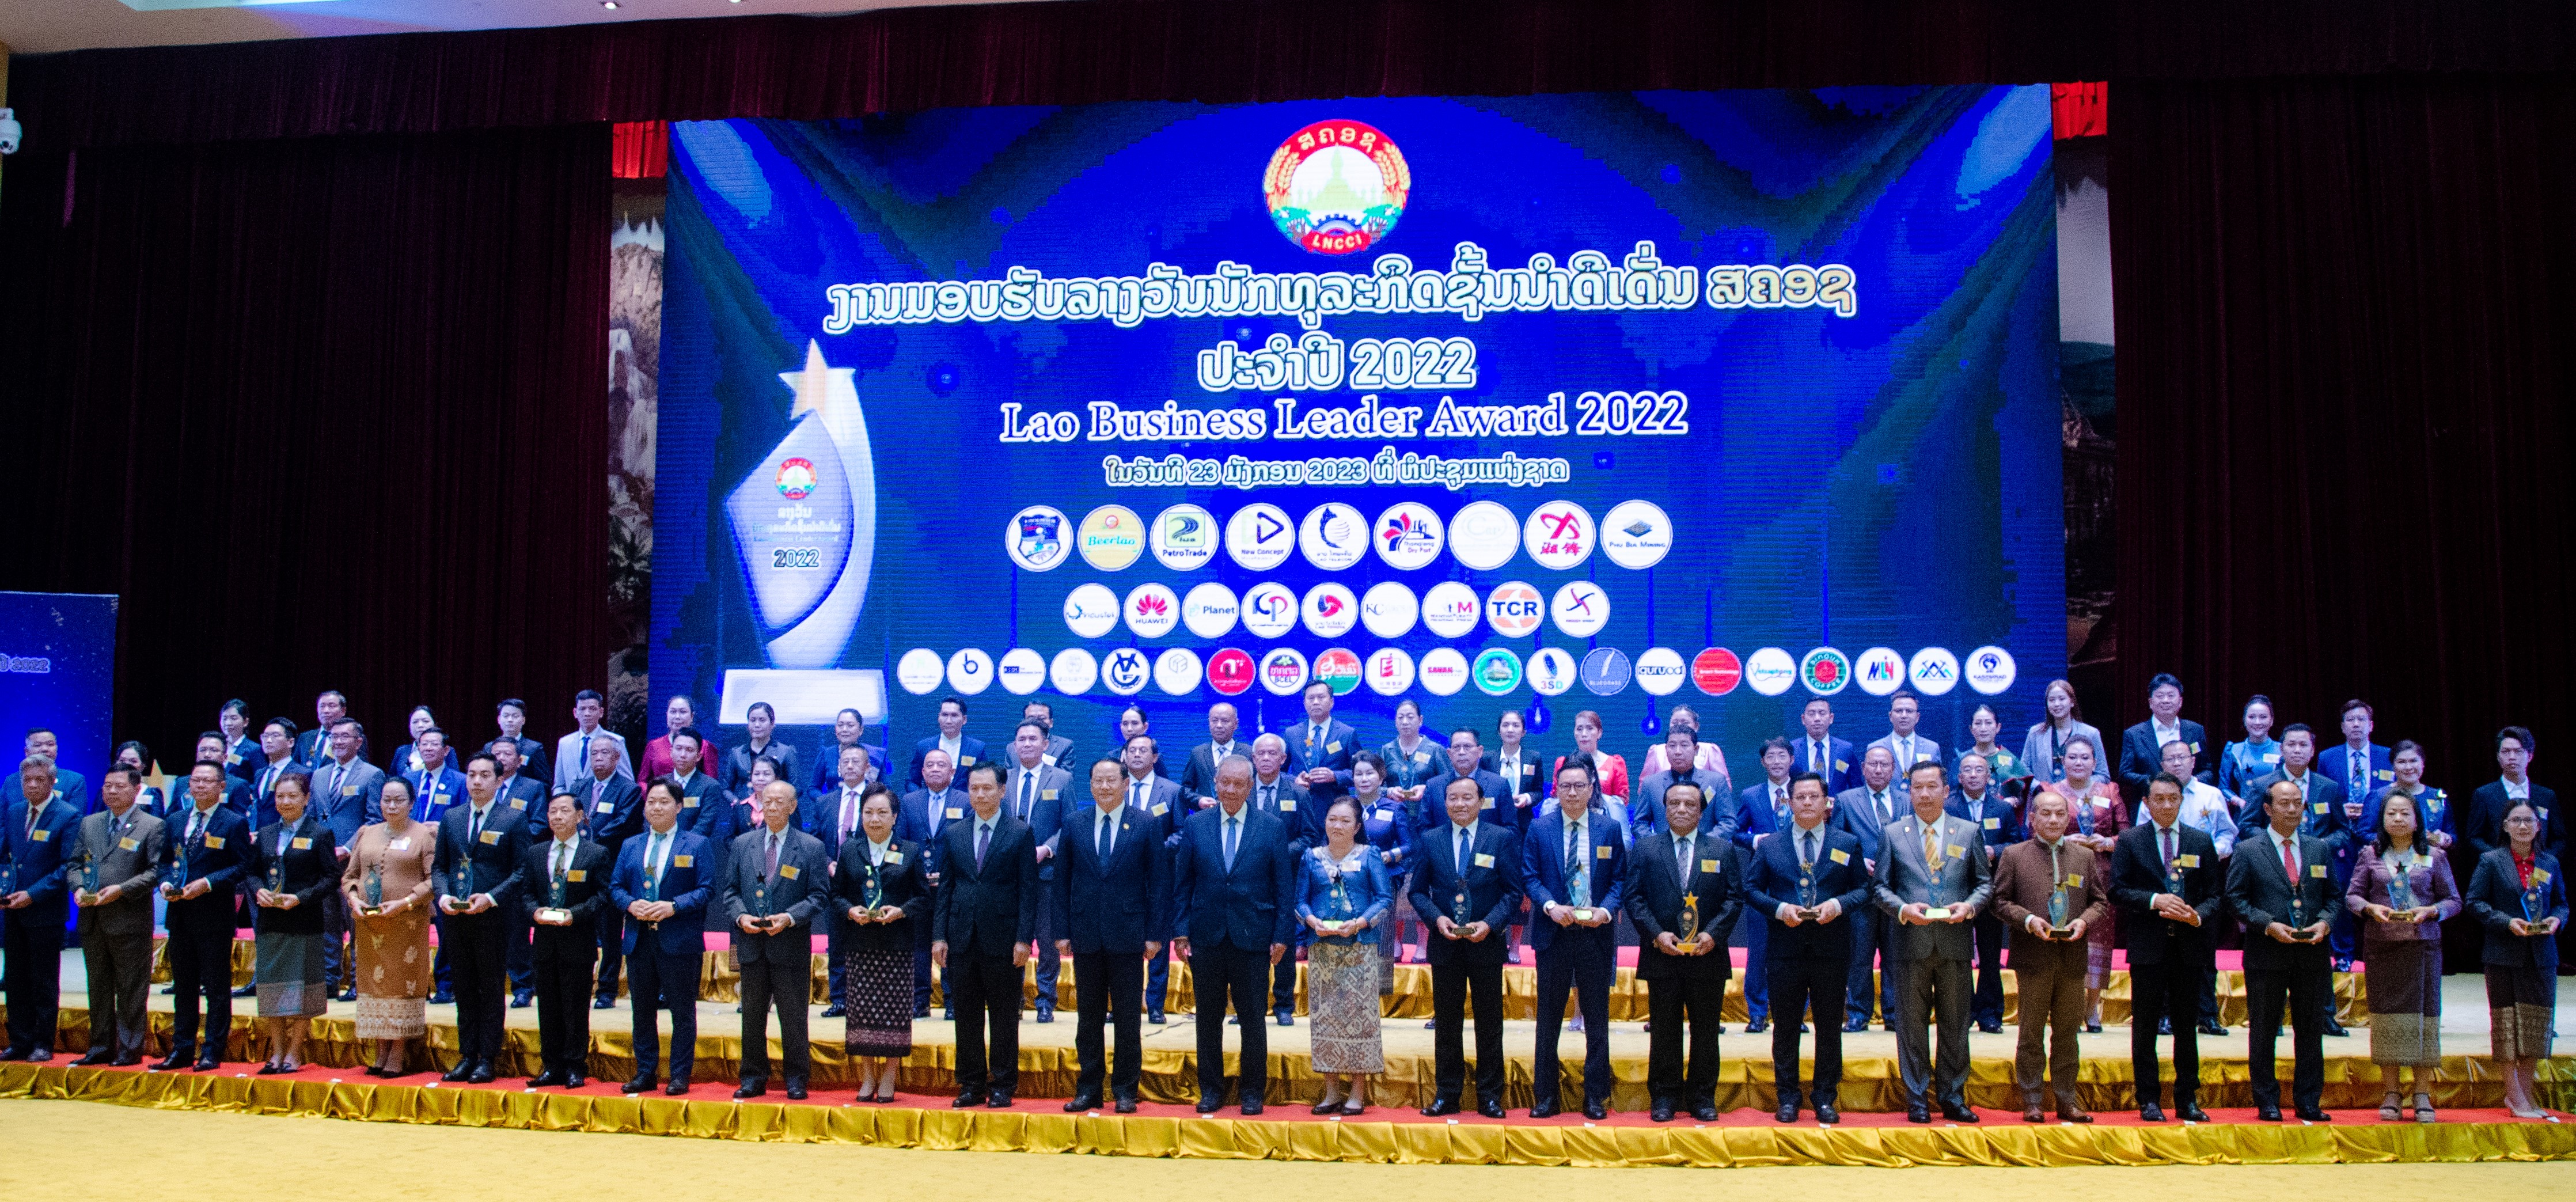 Chifeng LXML Sepon Honoured at 2022 Lao Business Leader Awards